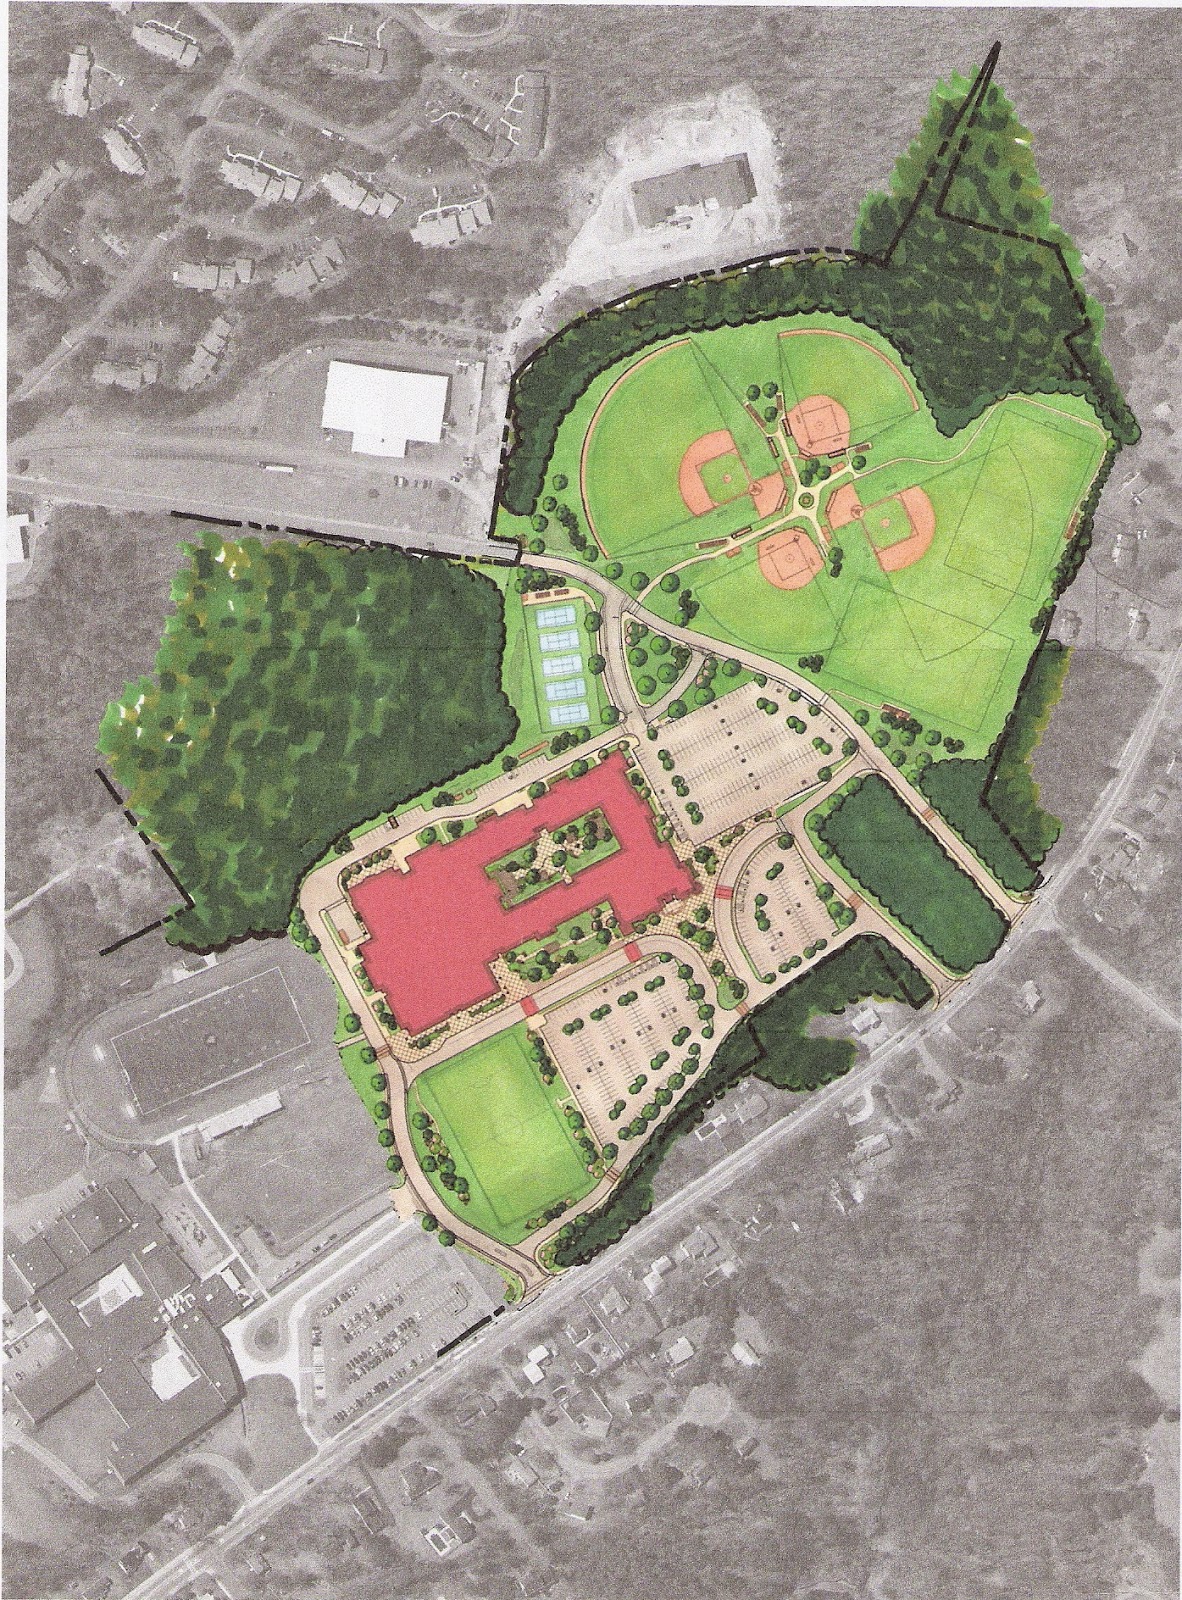 New FHS layout, green section in front left position along Oak St is where the practice fields would be that are now going to be a turf field that will be regulation sized and available for games